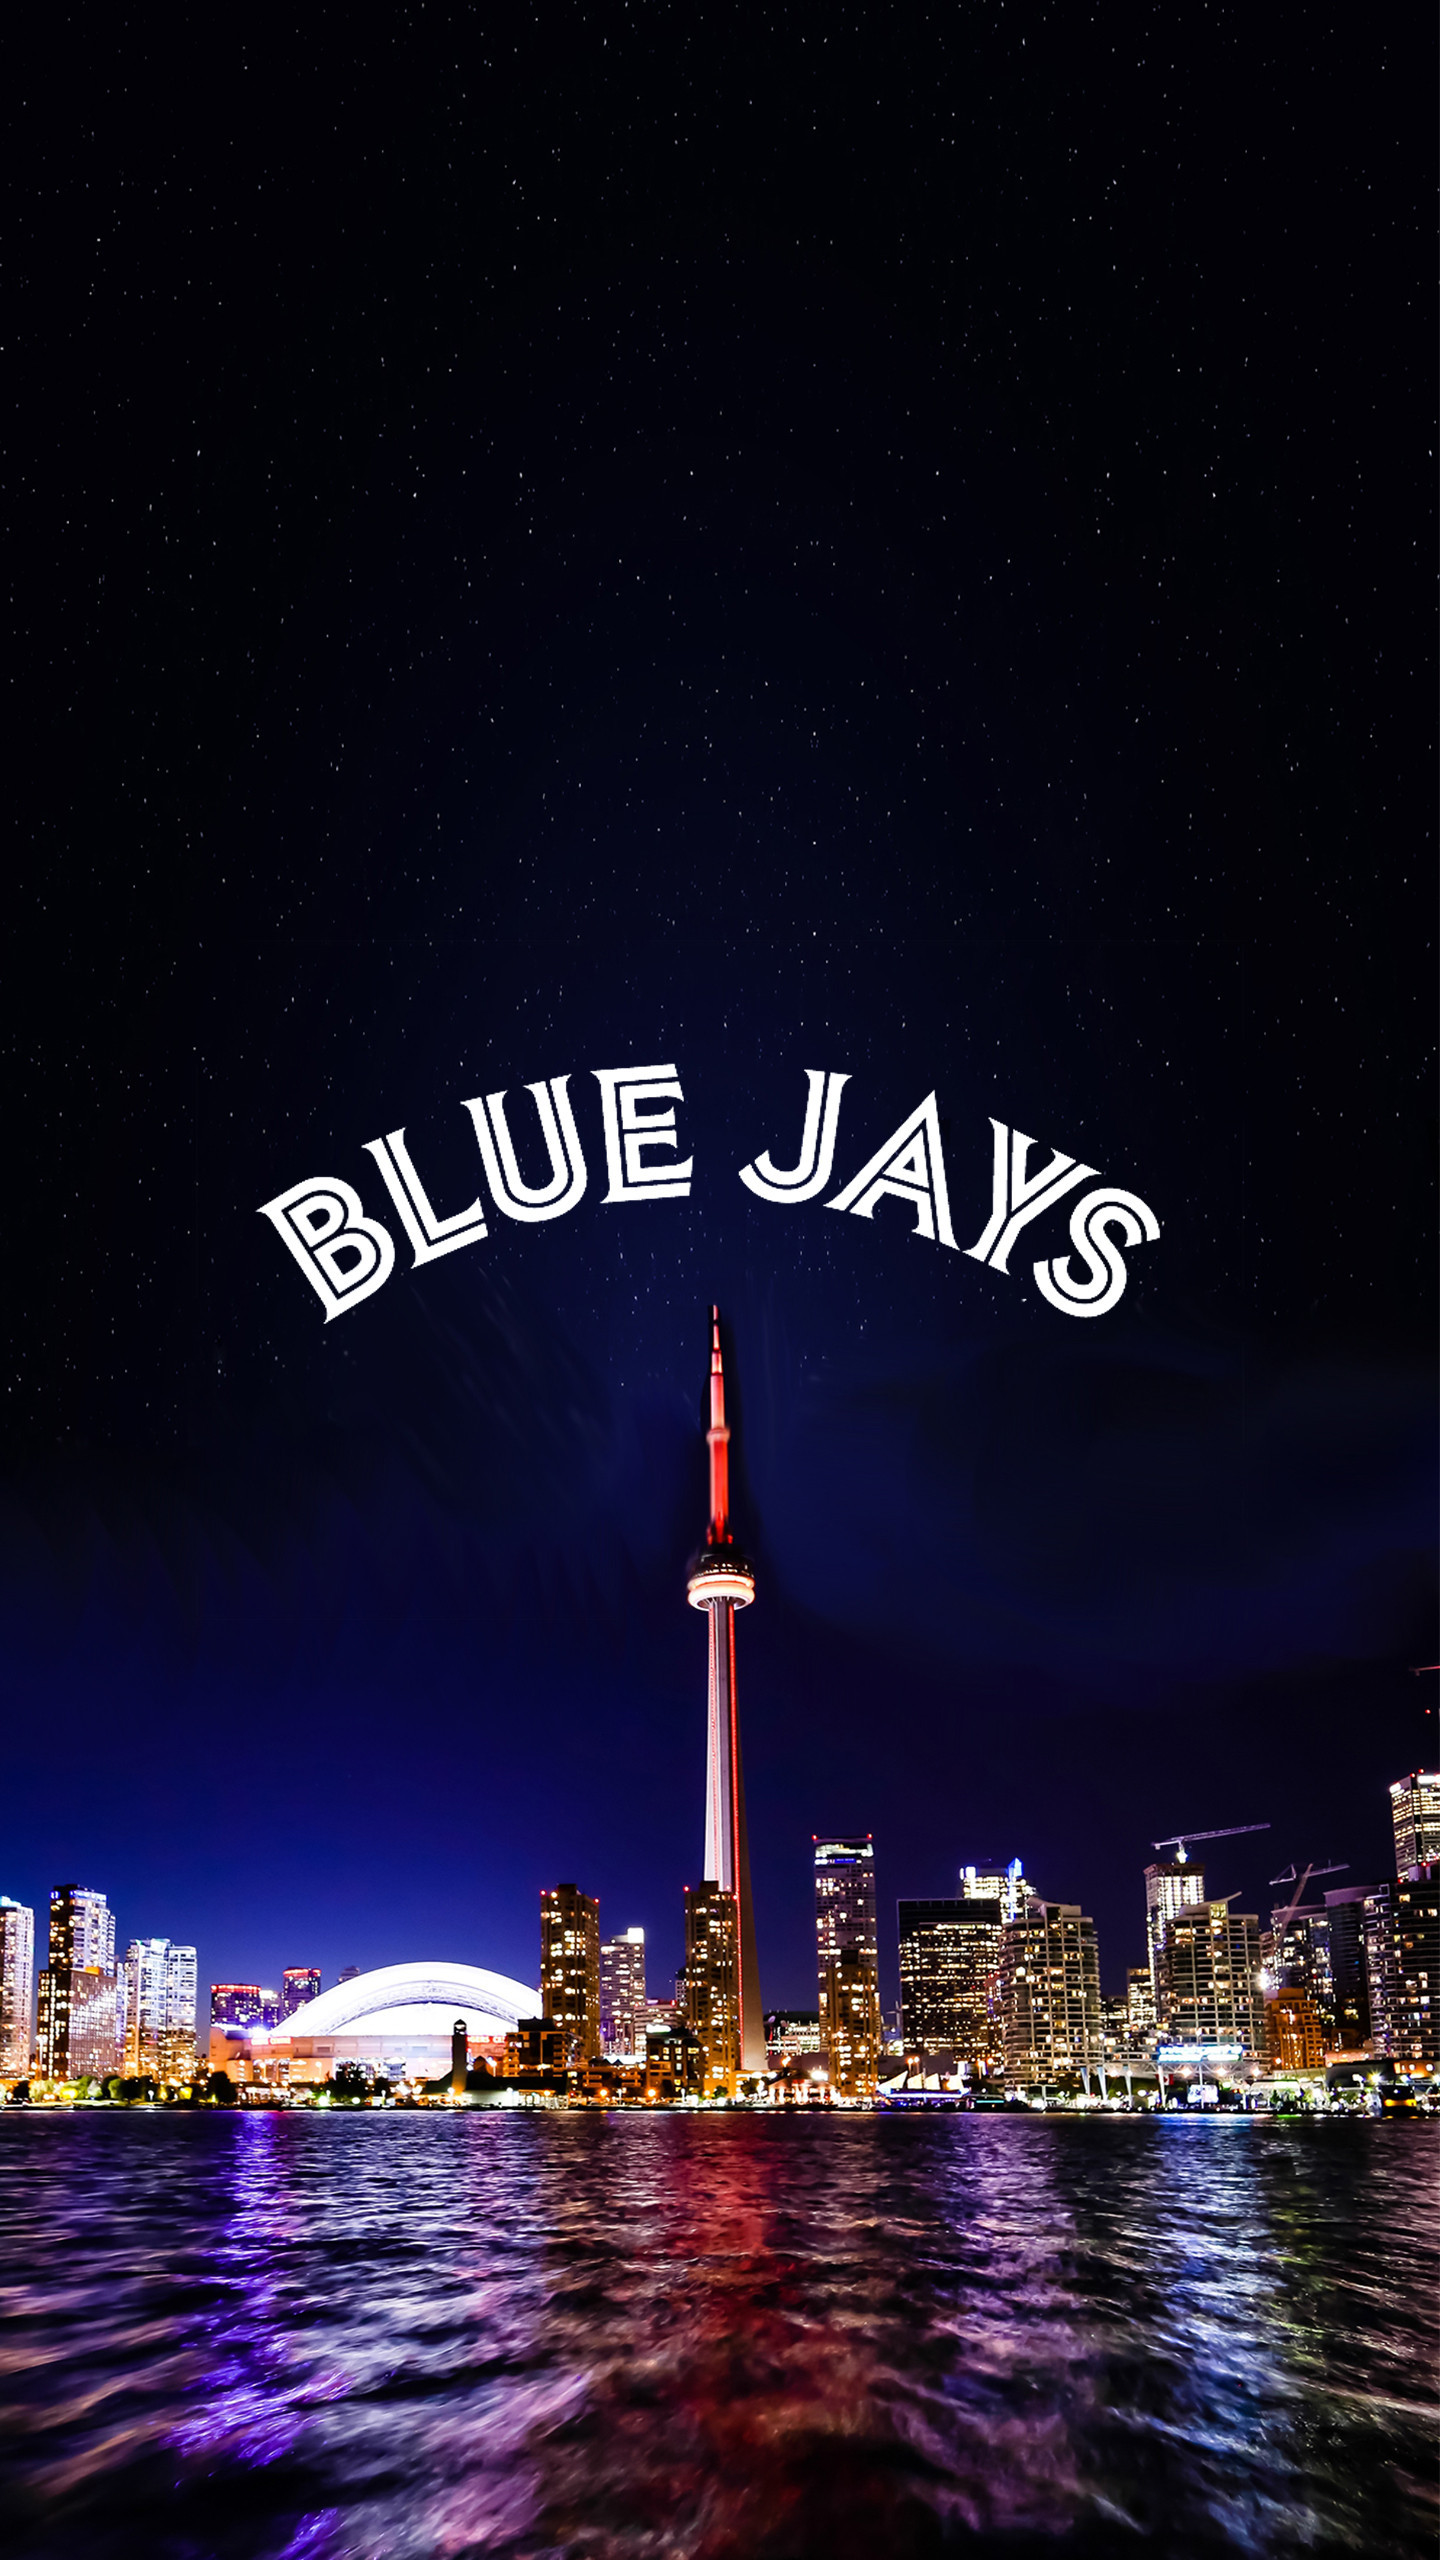 Toronto Maple Leafs Wallpaper 2018 (63+ images)